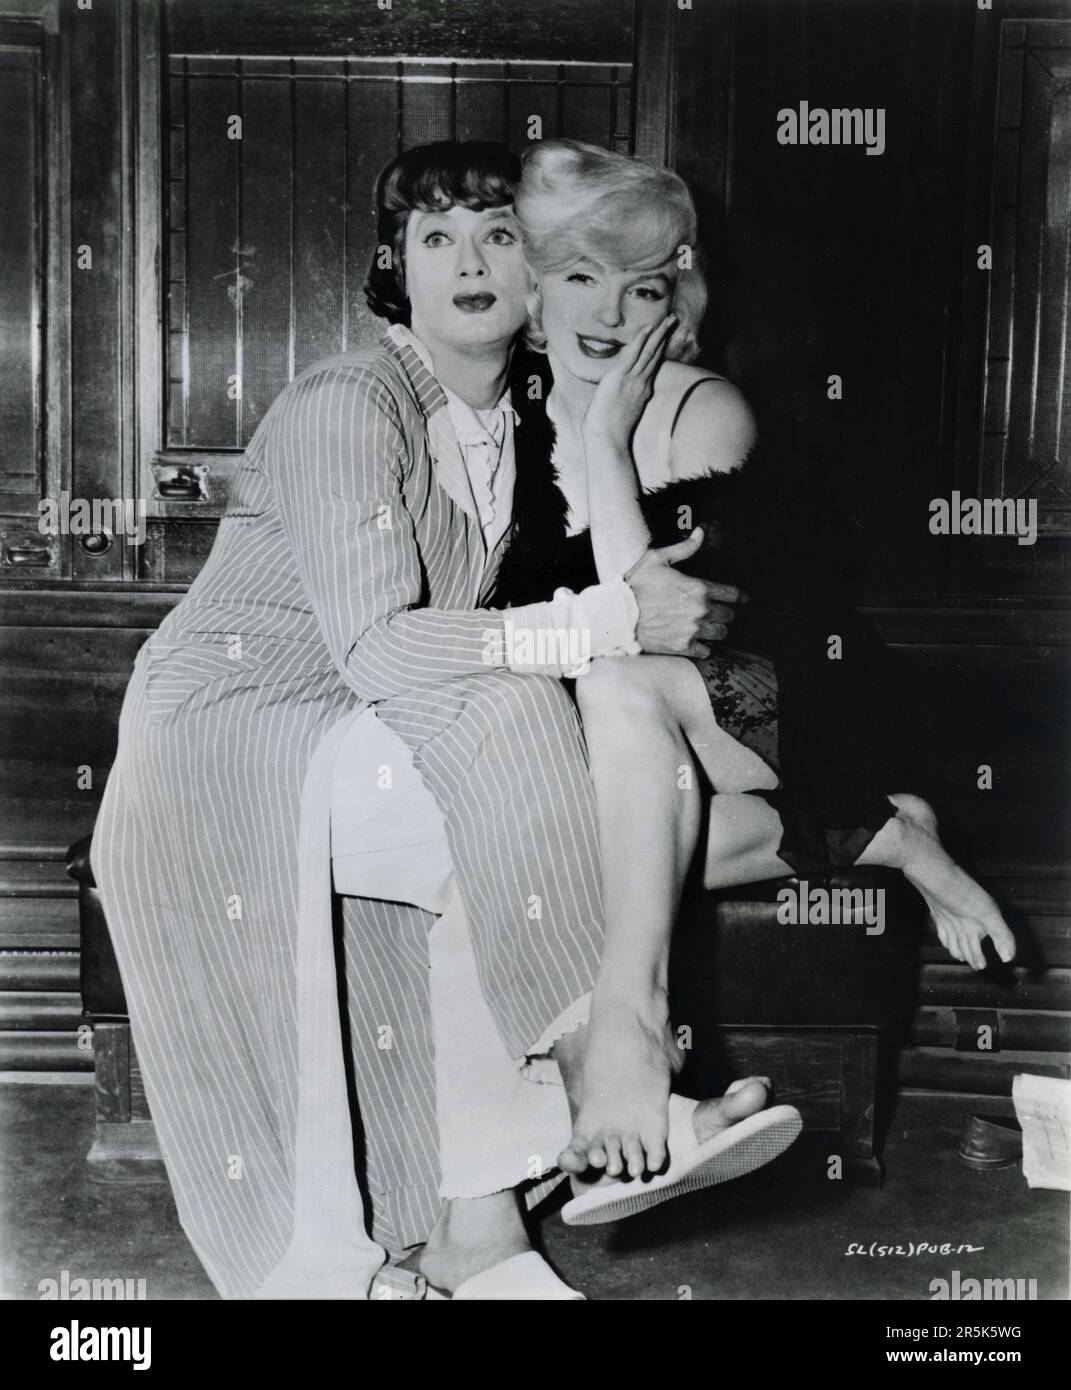 TONY CURTIS and MARILYN MONROE on set candid portrait during filming of SOME LIKE IT HOT 1959 director BILLY WILDER screenplay Billy Wilder and I.A.L. Diamond Ashton Productions / The Mirisch Corporation / United Artists Stock Photo